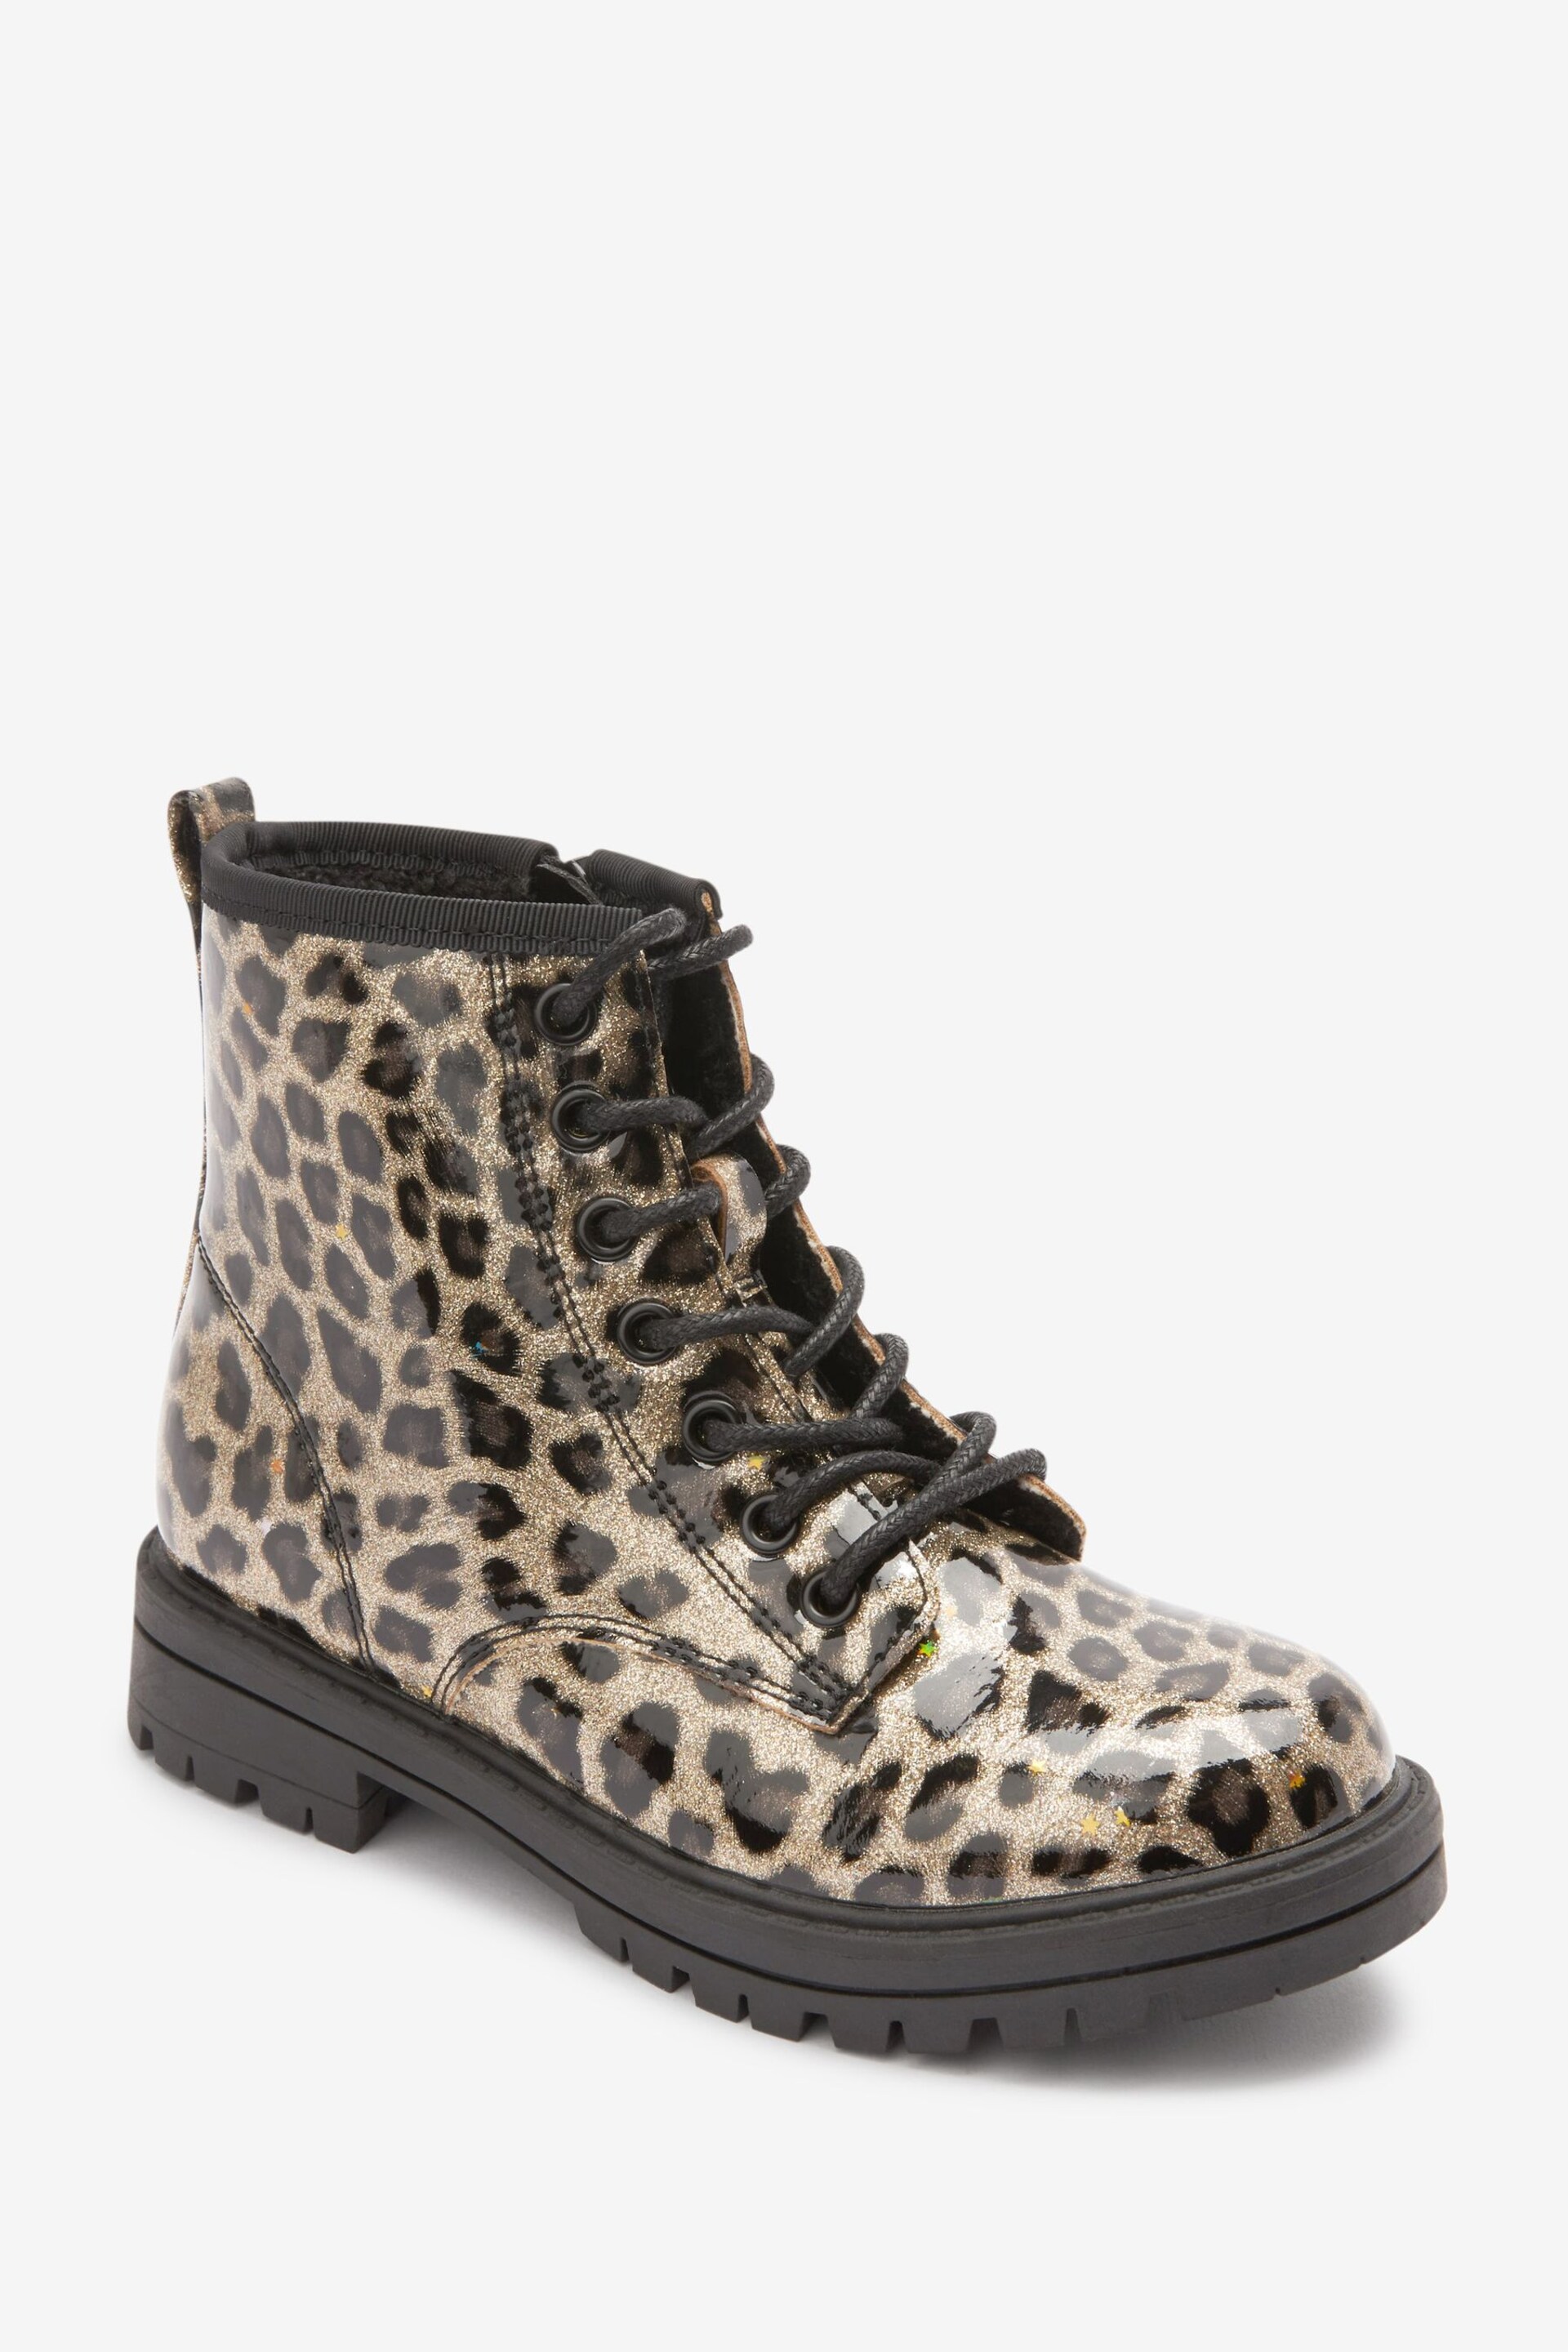 Leopard Print Standard Fit (F) Warm Lined Lace-Up Boots - Image 3 of 11